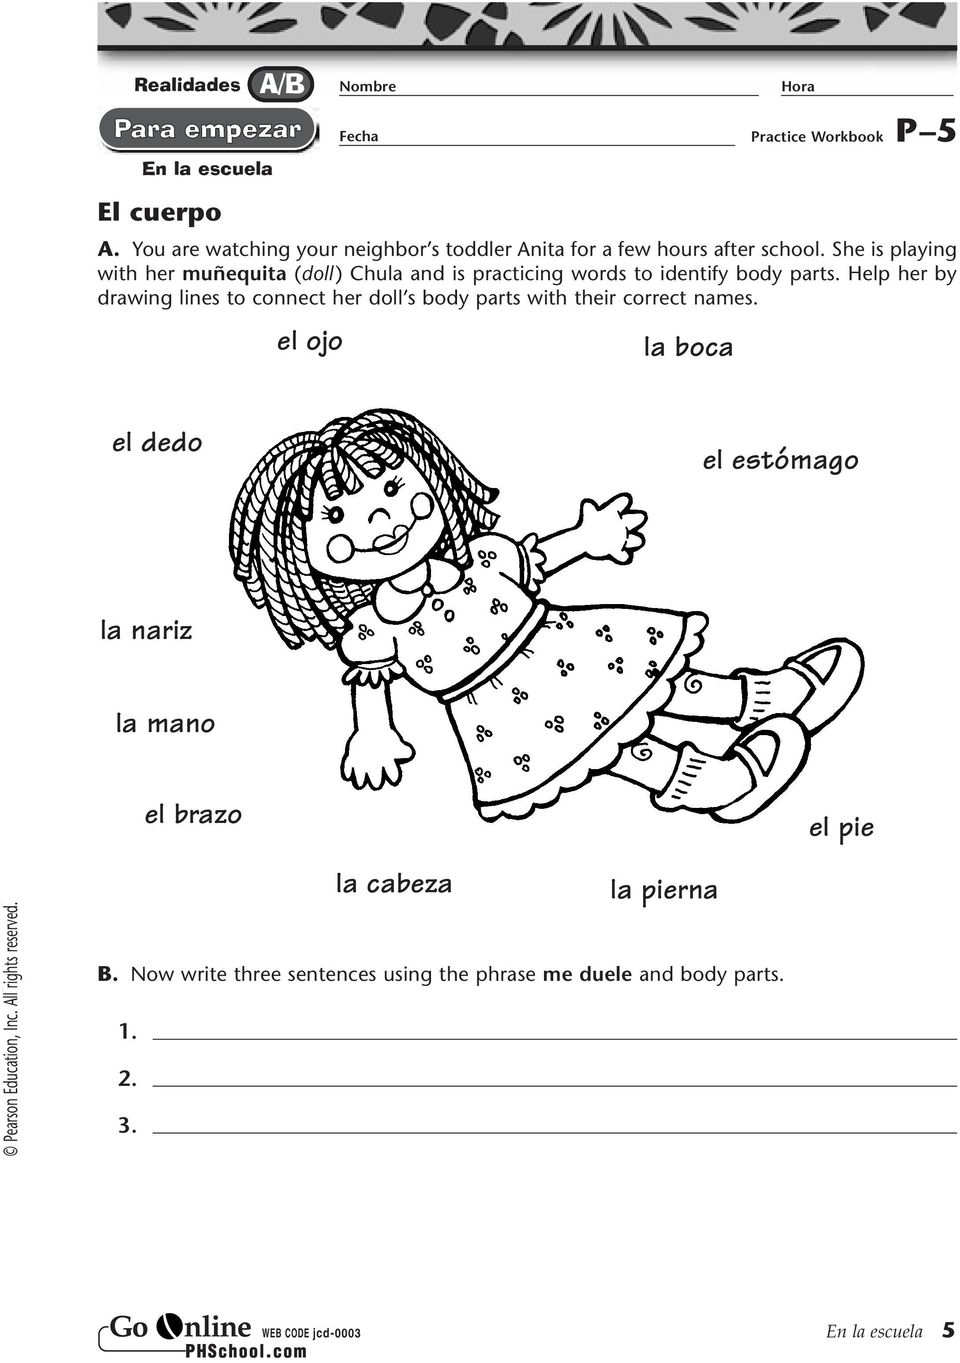 Help her by drawing lines to connect her doll s body parts with their correct names.